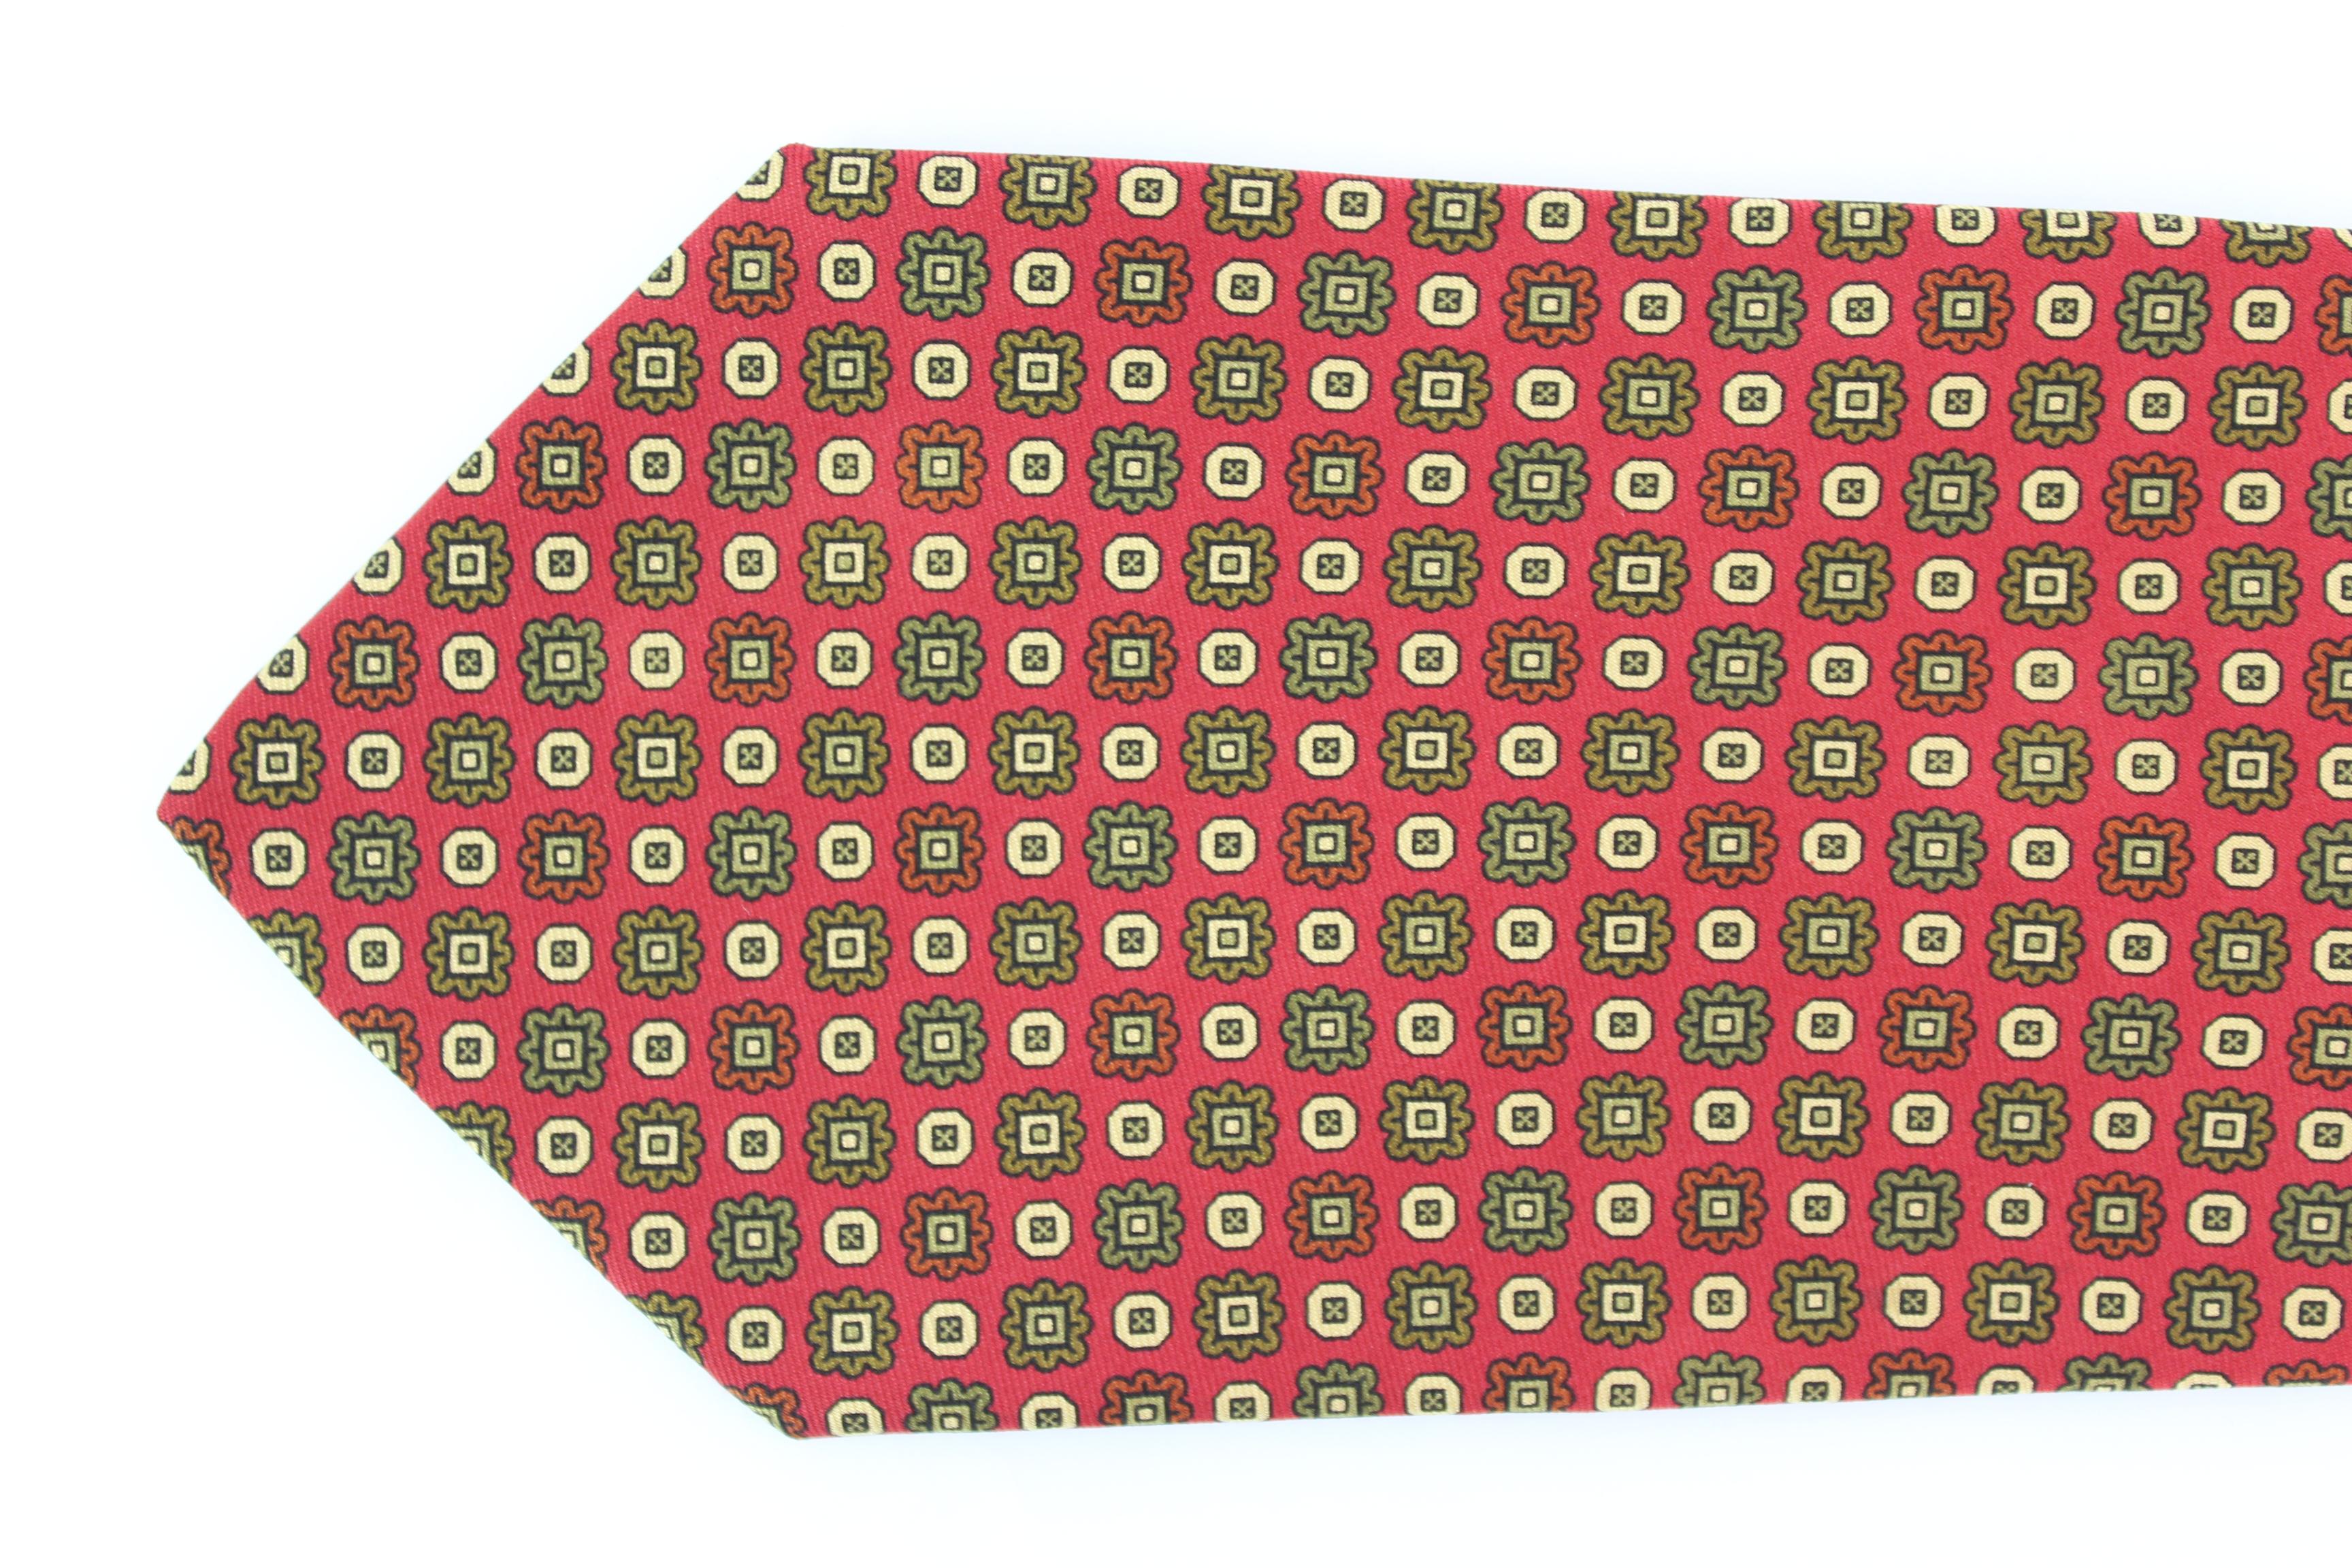 Etro vintage 90s tie. Classic tie, red and beige with geometric designs. 100% silk. Made in Italy. Excellent vintage condition.

Length: 145 cm
Width: 9 cm